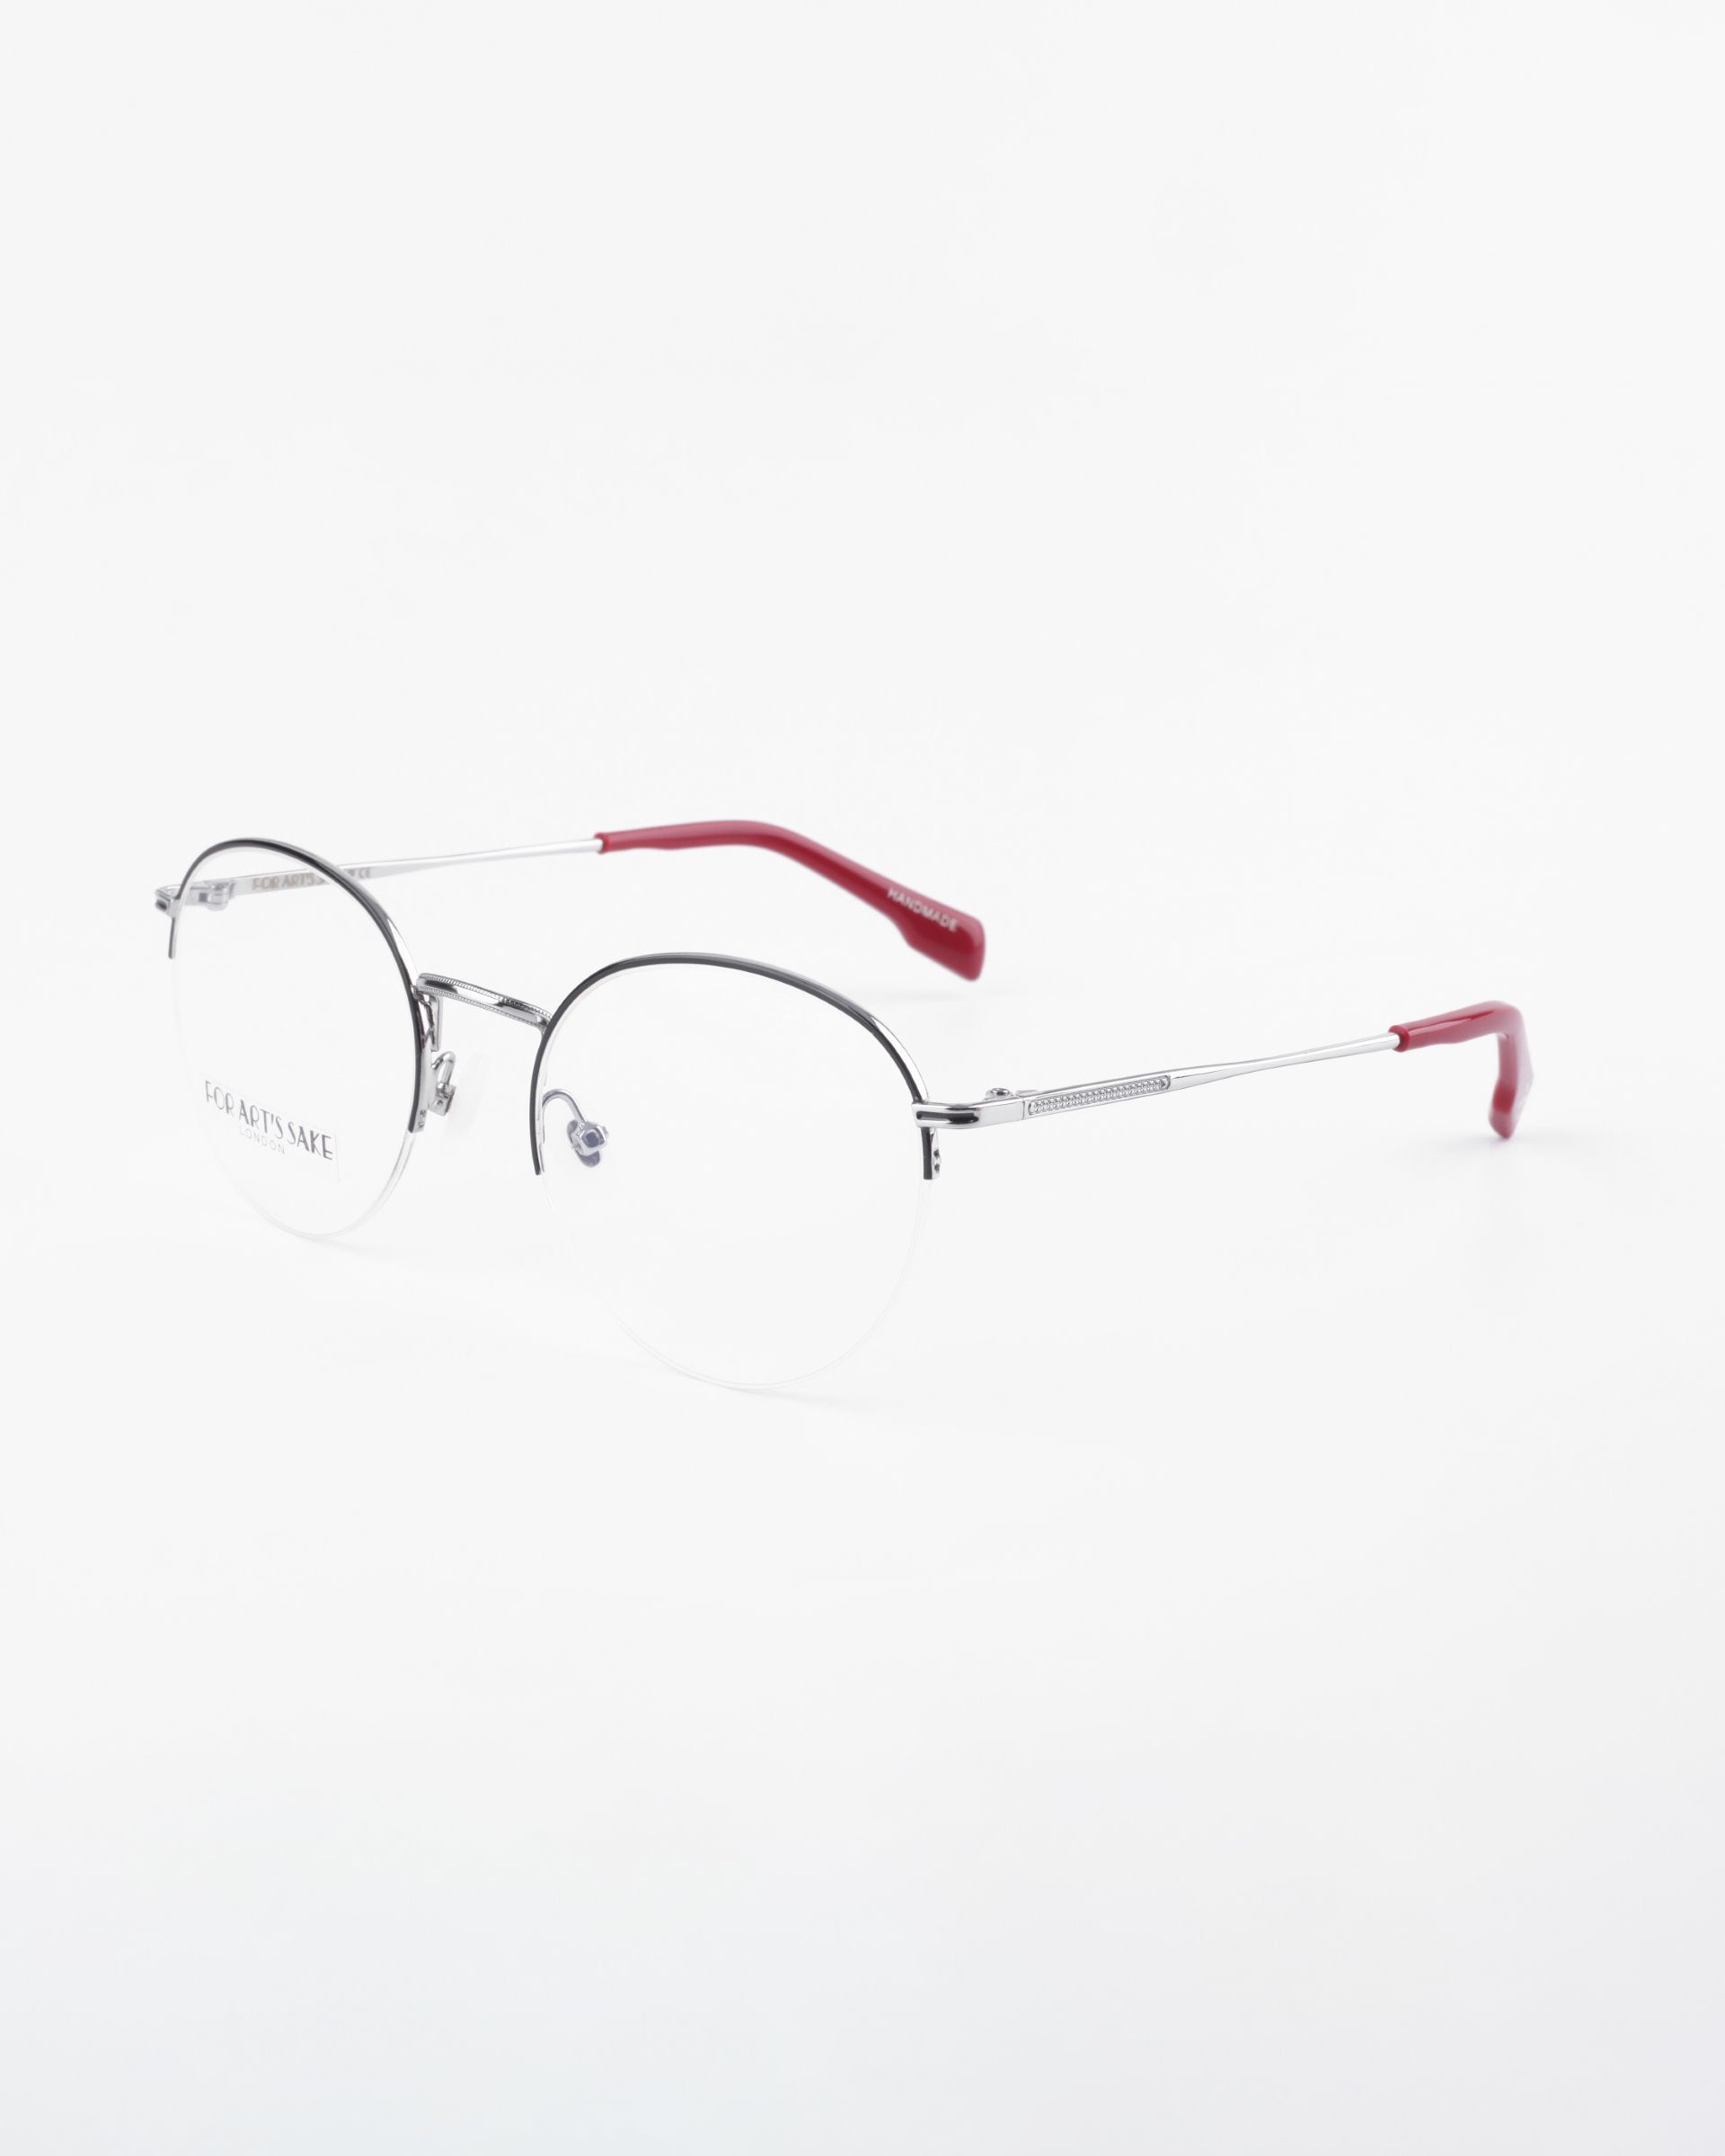 A pair of Ivy by For Art&#39;s Sake® with thin, silver metal frames and red earpieces. The design is minimalistic and modern, featuring adjustable nose pads for comfort and prescription lenses with a blue light filter. The brand&#39;s name is subtly visible on one side of the frame, set against a white background.